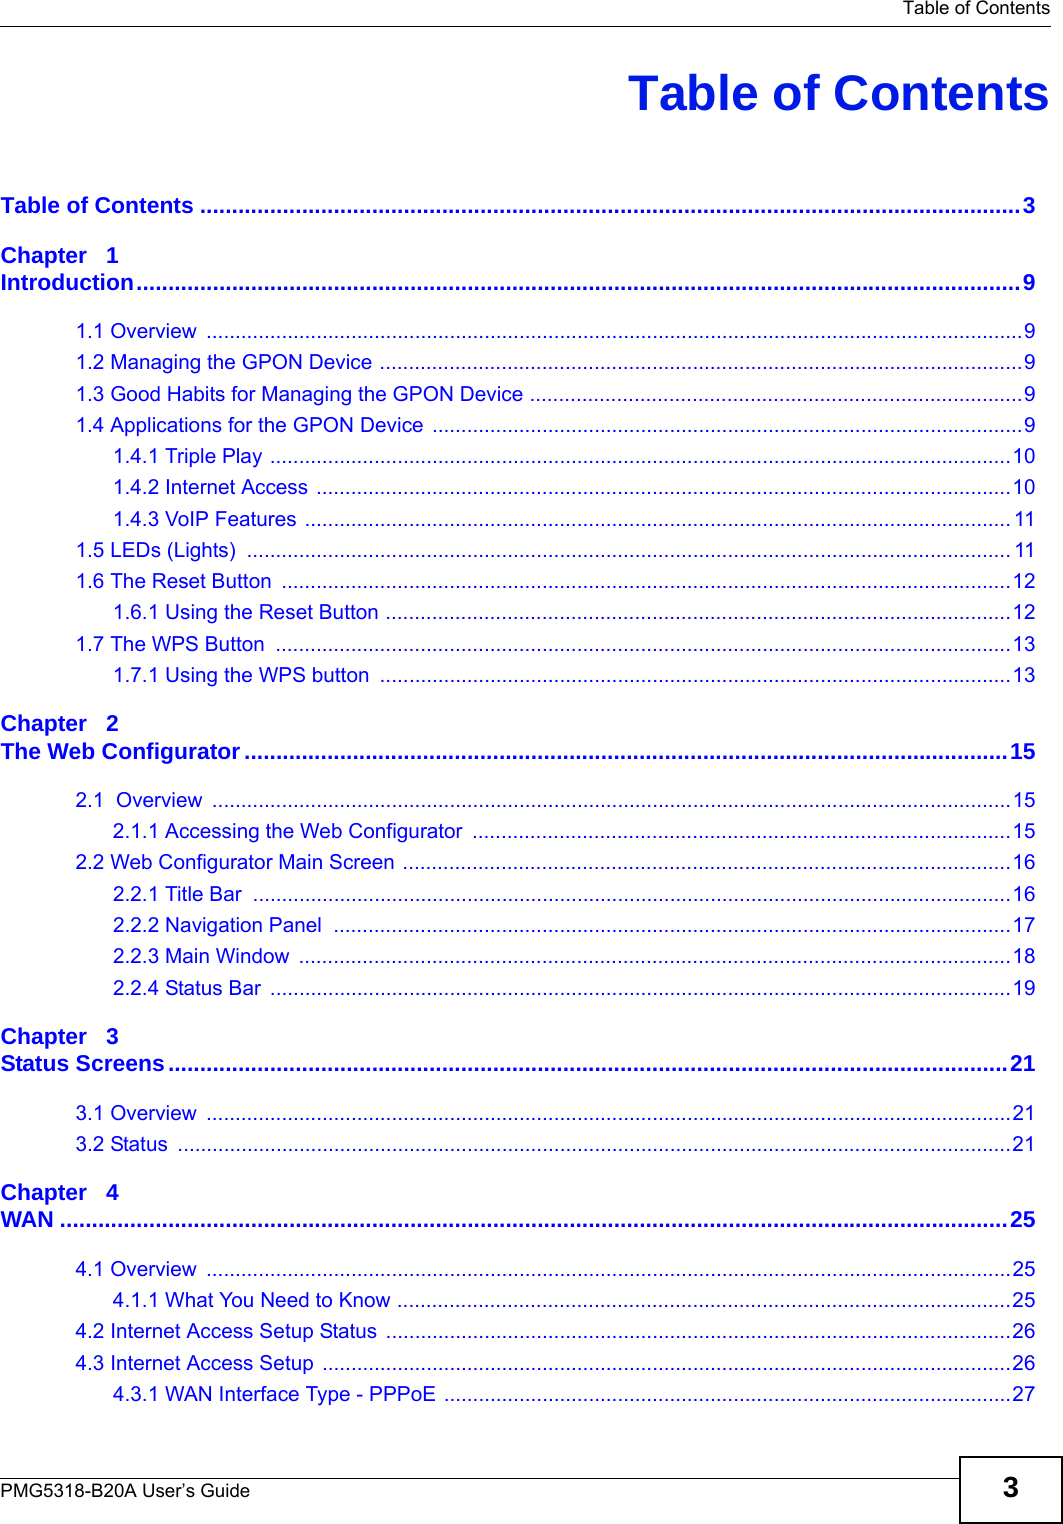   Table of ContentsPMG5318-B20A User’s Guide 3Table of ContentsTable of Contents .................................................................................................................................3Chapter   1Introduction...........................................................................................................................................91.1 Overview  .............................................................................................................................................91.2 Managing the GPON Device ...............................................................................................................91.3 Good Habits for Managing the GPON Device .....................................................................................91.4 Applications for the GPON Device ......................................................................................................91.4.1 Triple Play ................................................................................................................................101.4.2 Internet Access ........................................................................................................................101.4.3 VoIP Features .......................................................................................................................... 111.5 LEDs (Lights)  .................................................................................................................................... 111.6 The Reset Button  ..............................................................................................................................121.6.1 Using the Reset Button ............................................................................................................121.7 The WPS Button  ...............................................................................................................................131.7.1 Using the WPS button  .............................................................................................................13Chapter   2The Web Configurator........................................................................................................................152.1  Overview  ..........................................................................................................................................152.1.1 Accessing the Web Configurator  .............................................................................................152.2 Web Configurator Main Screen .........................................................................................................162.2.1 Title Bar  ...................................................................................................................................162.2.2 Navigation Panel  .....................................................................................................................172.2.3 Main Window  ...........................................................................................................................182.2.4 Status Bar  ................................................................................................................................19Chapter   3Status Screens....................................................................................................................................213.1 Overview  ...........................................................................................................................................213.2 Status  ................................................................................................................................................21Chapter   4WAN .....................................................................................................................................................254.1 Overview  ...........................................................................................................................................254.1.1 What You Need to Know ..........................................................................................................254.2 Internet Access Setup Status ............................................................................................................264.3 Internet Access Setup .......................................................................................................................264.3.1 WAN Interface Type - PPPoE ..................................................................................................27